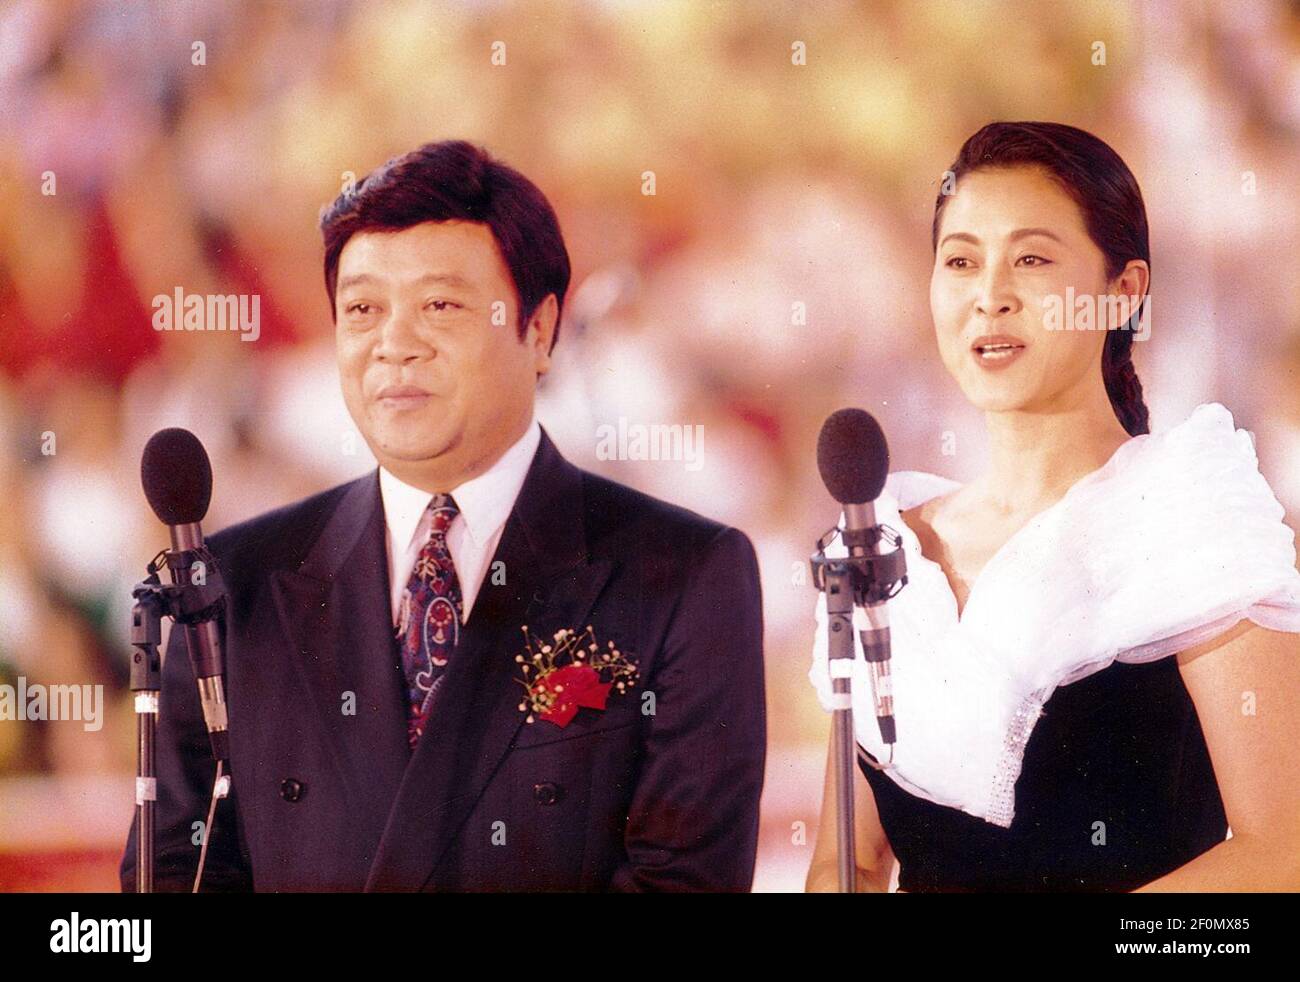 In this unlocated photo, Chinese news anchor Zhao Zhongxiang, left, and Chinese film actress and TV host Ni Ping, right, host at a program, 29 October 1995. Zhao Zhongxiang, one of the most famous Chinese TV hosts and news anchors, has died on Thursday in Beijing at the age of 78. The TV host is a household name in China, he started working as a news anchor for Beijing Television in 1959, which later became China Central Television (CCTV). There he became the second TV news anchor and the first male TV news anchor in China's history. In 1979, he went with Chinese leader Deng Xiaoping on a stat Stock Photo